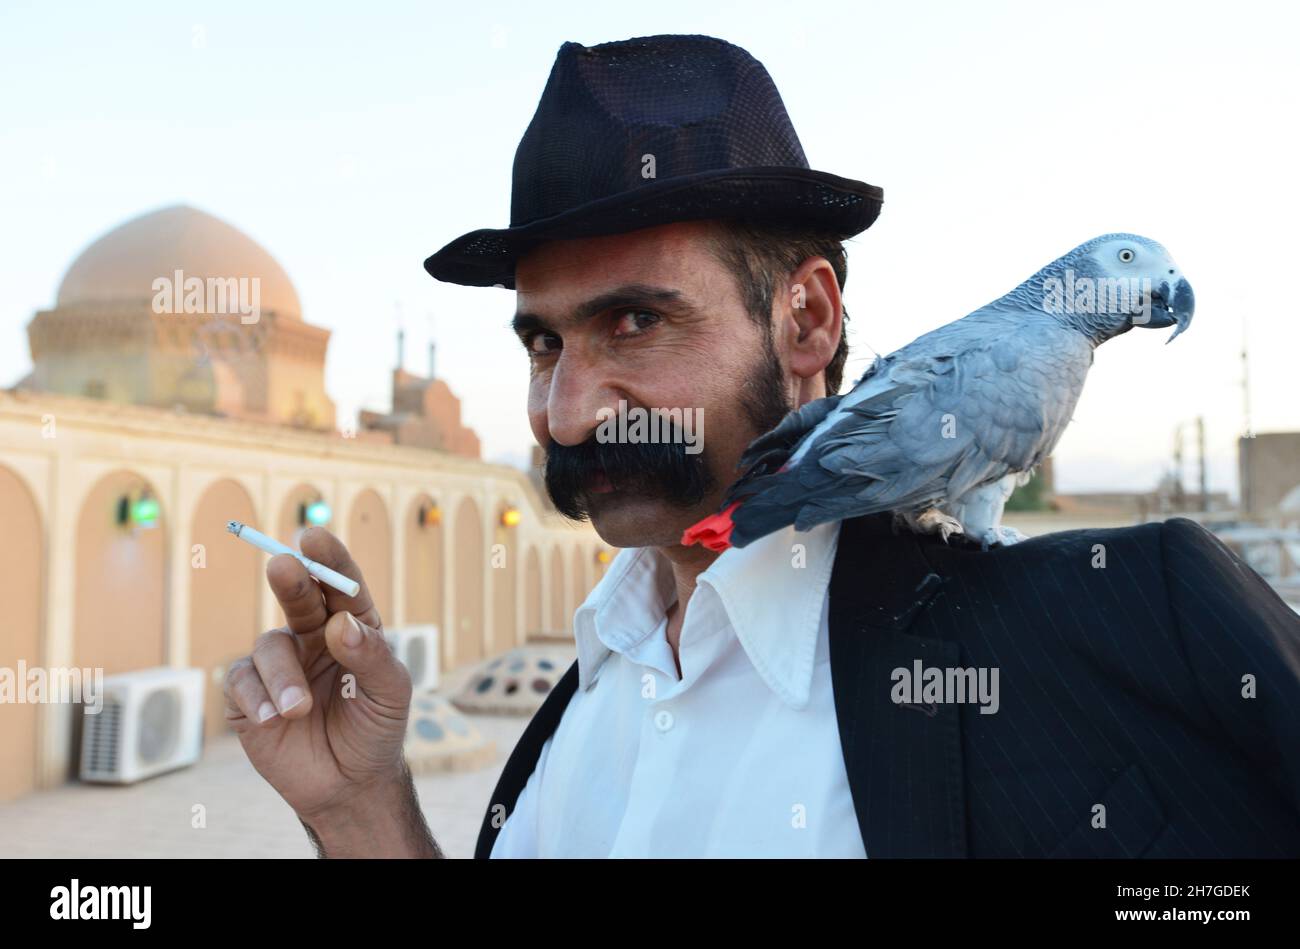 IRAN. YAZD. PORTRAIT OF A MAN WITH A PARROT. Stock Photo